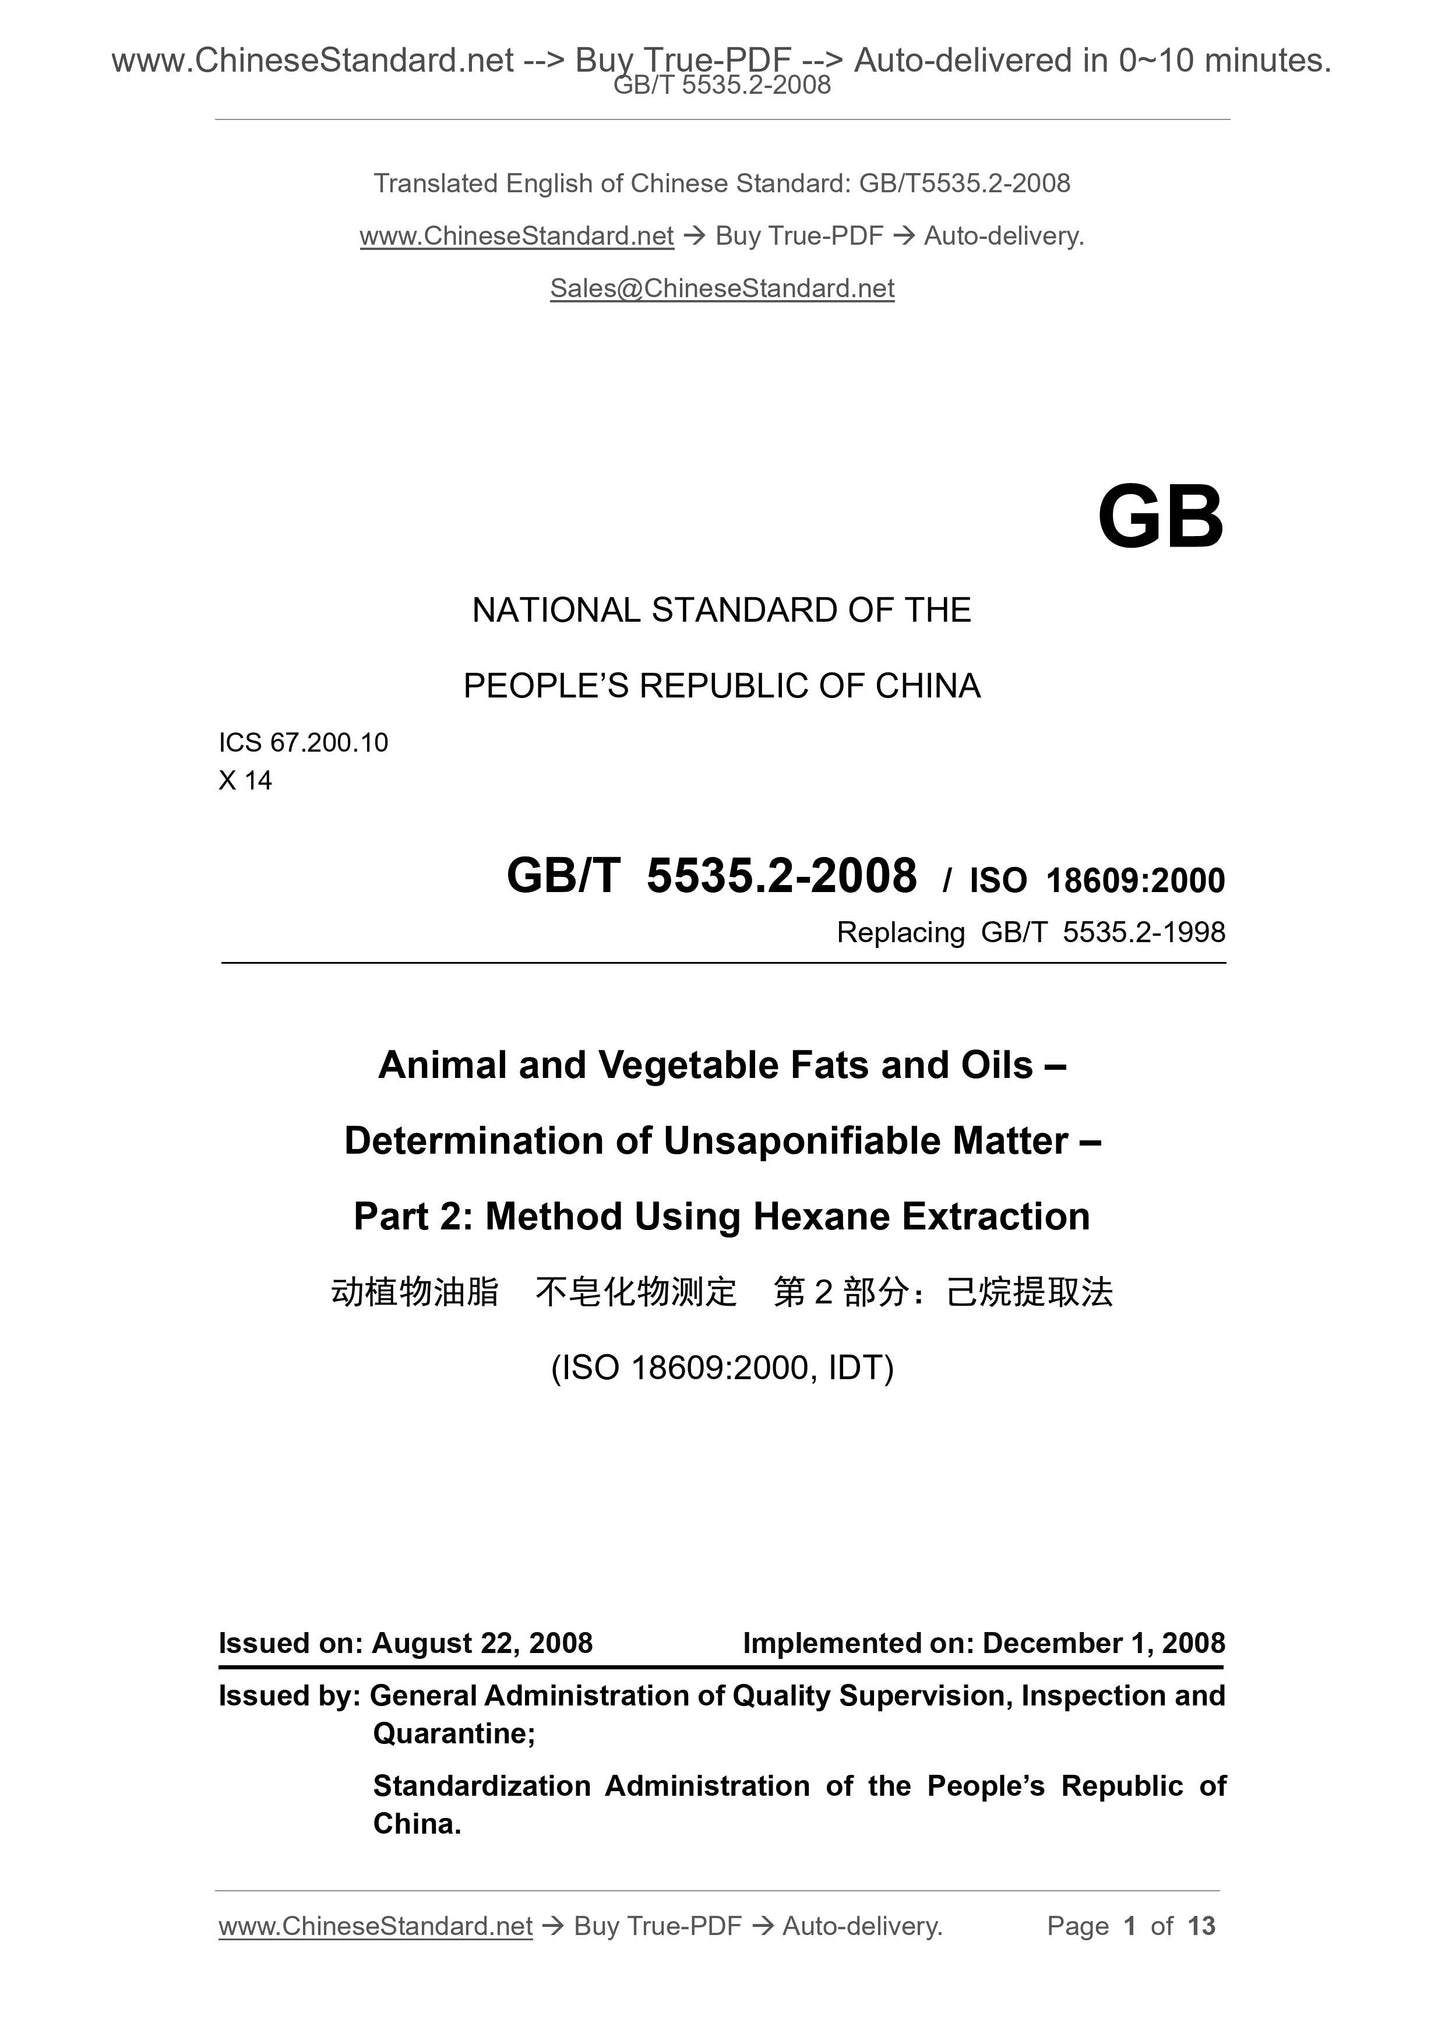 GB/T 5535.2-2008 Page 1